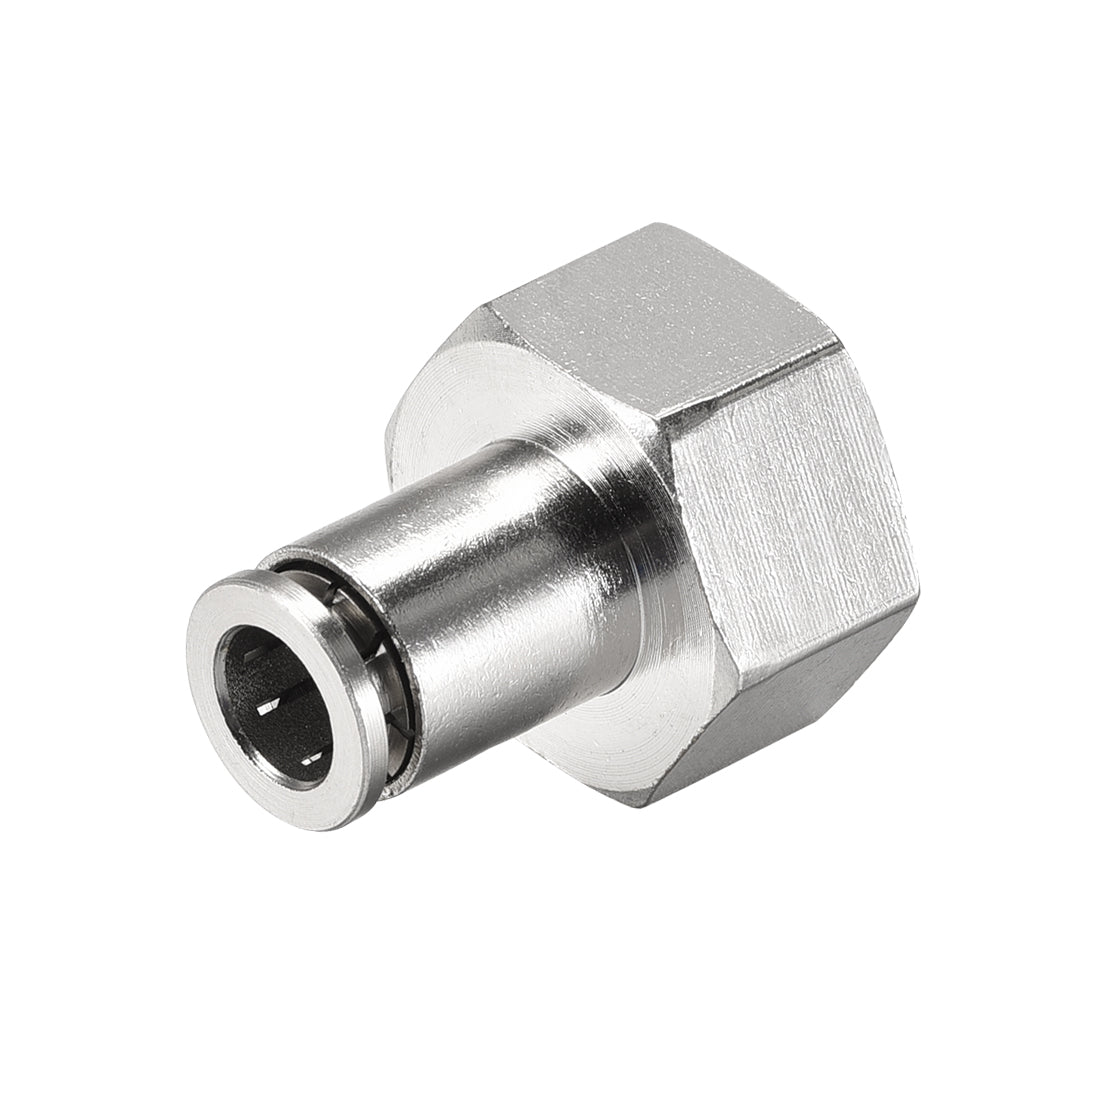 uxcell Uxcell Push to Connect Tube Fittings 8mm Tube OD x 1/2 PT Female Silver Tone